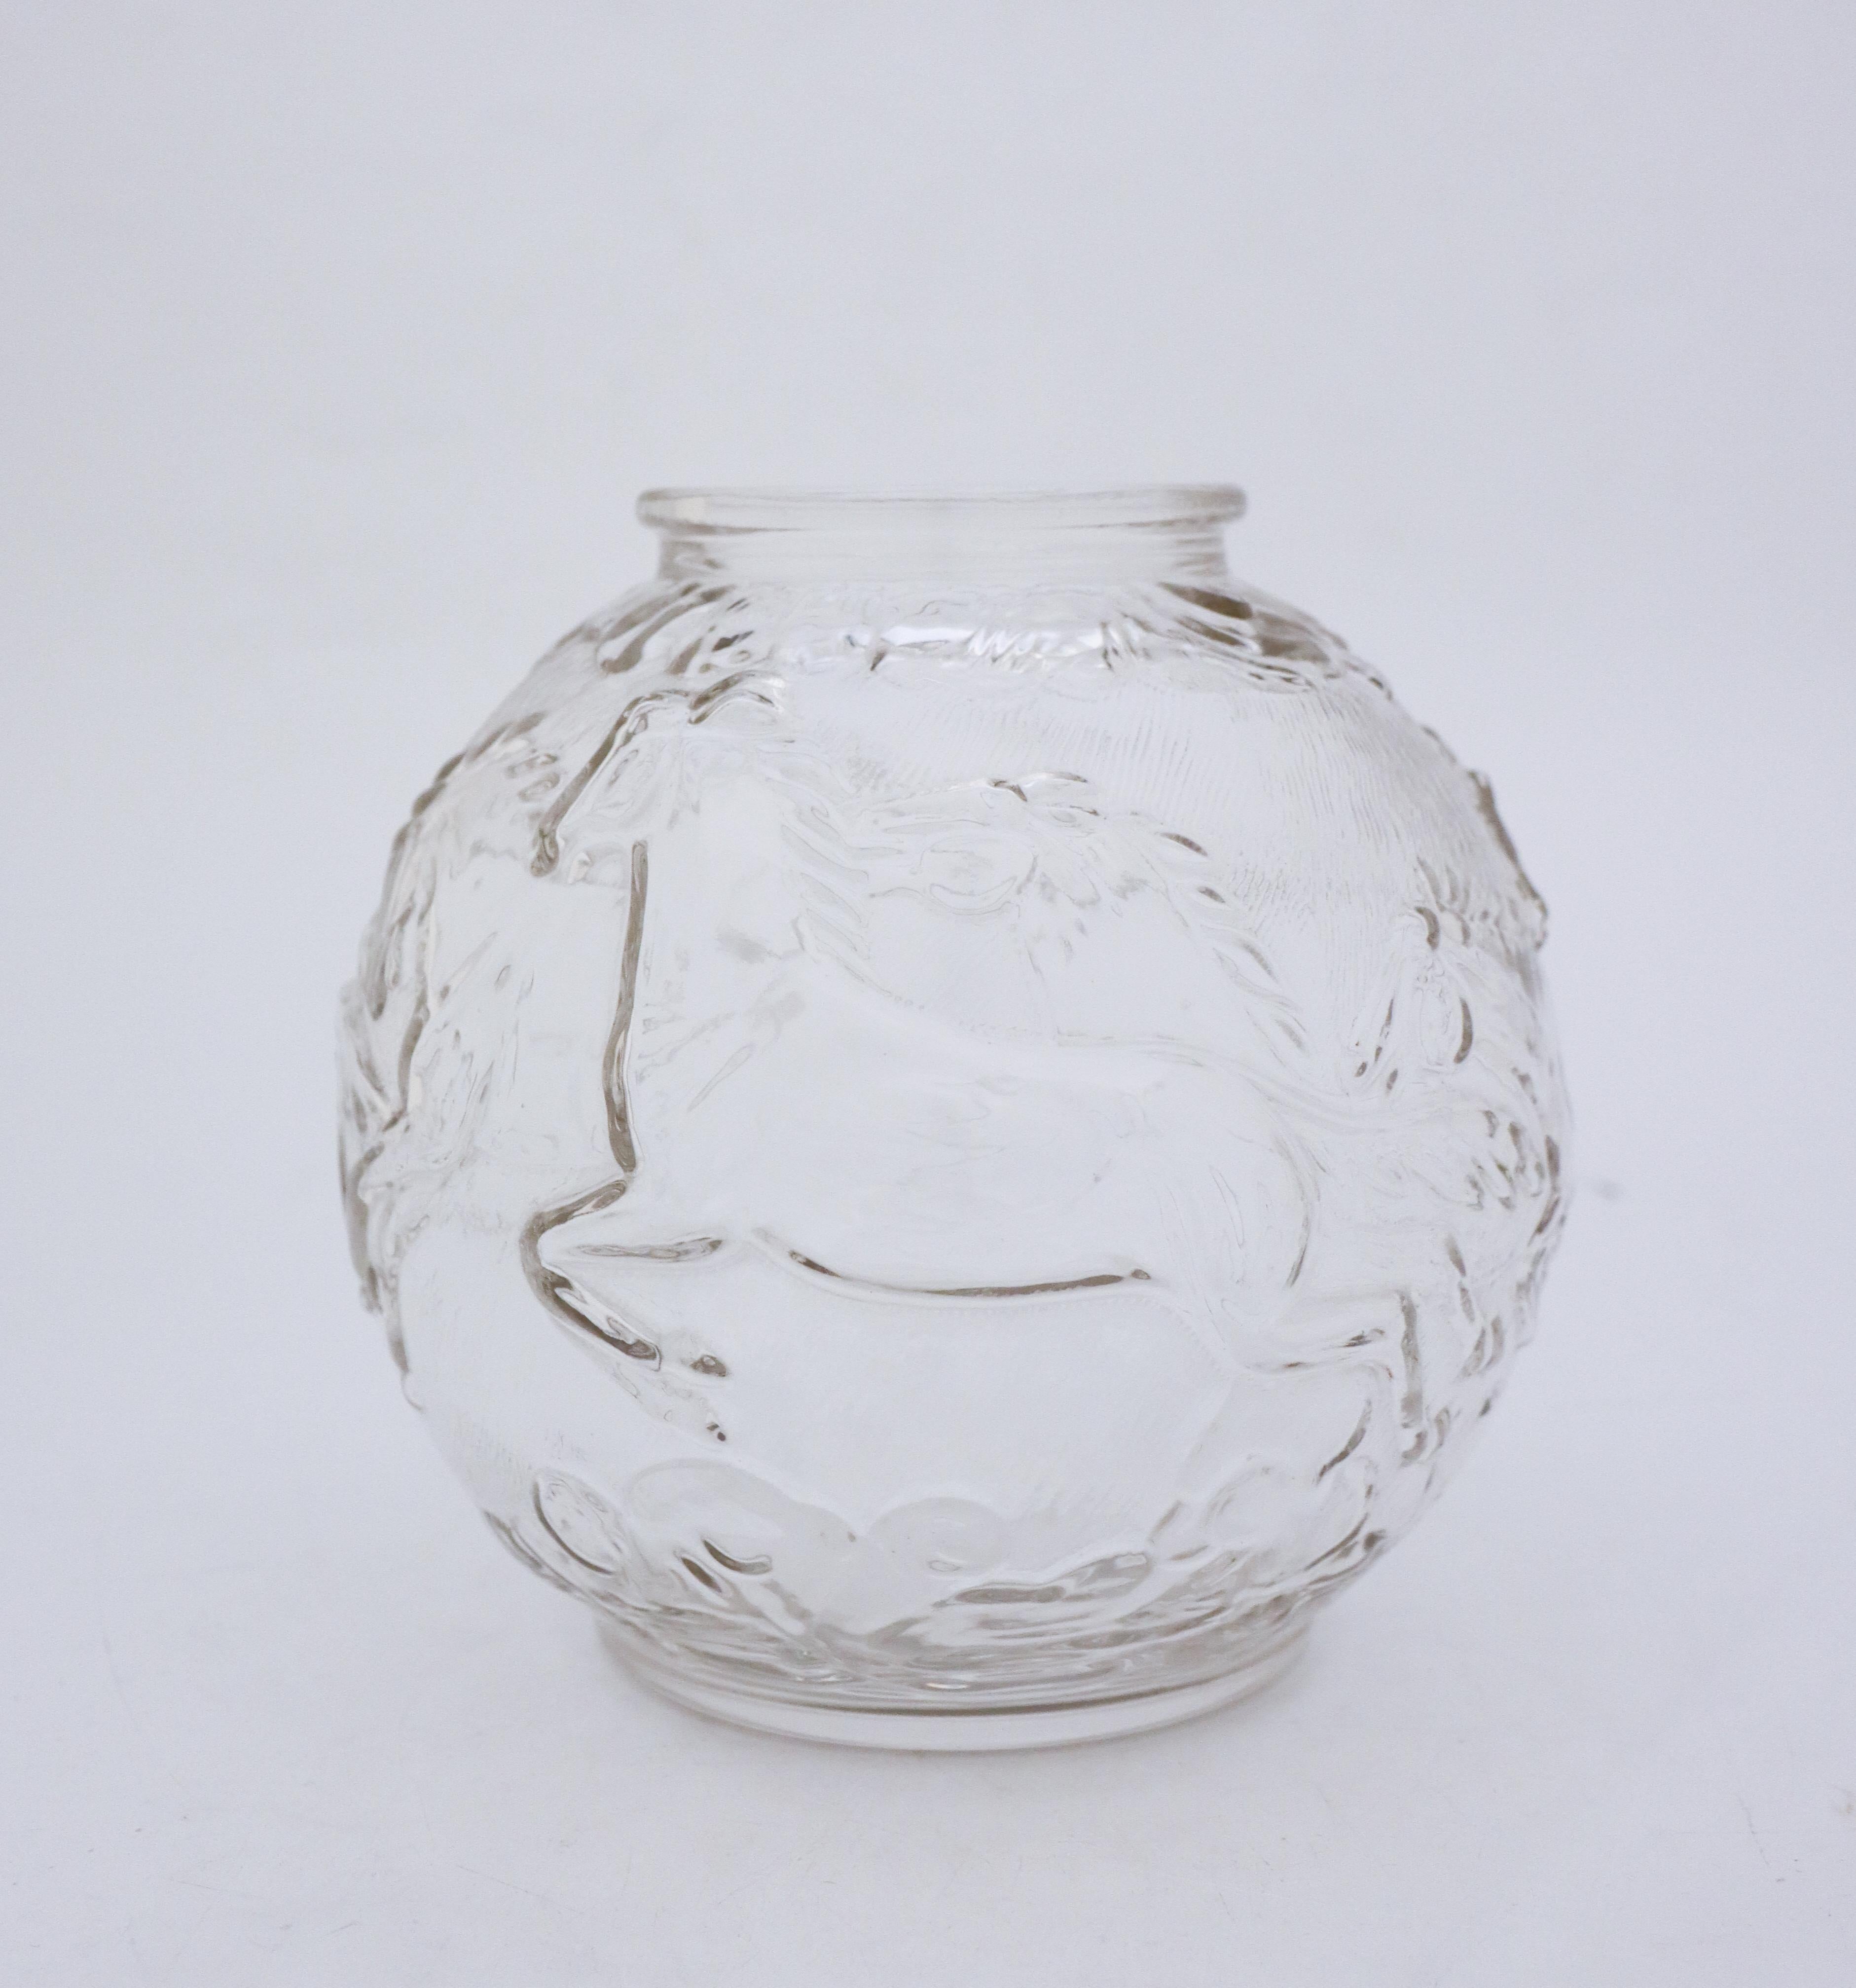 A stunning round globe vase in glass designed by Edvin Ollers at Glimma Glass works in the 1950s. It is 18 cm in diameter and about 18 cm high. The vase is in transparent glass with a decor of horses, it is molded. It is in very good condition, it